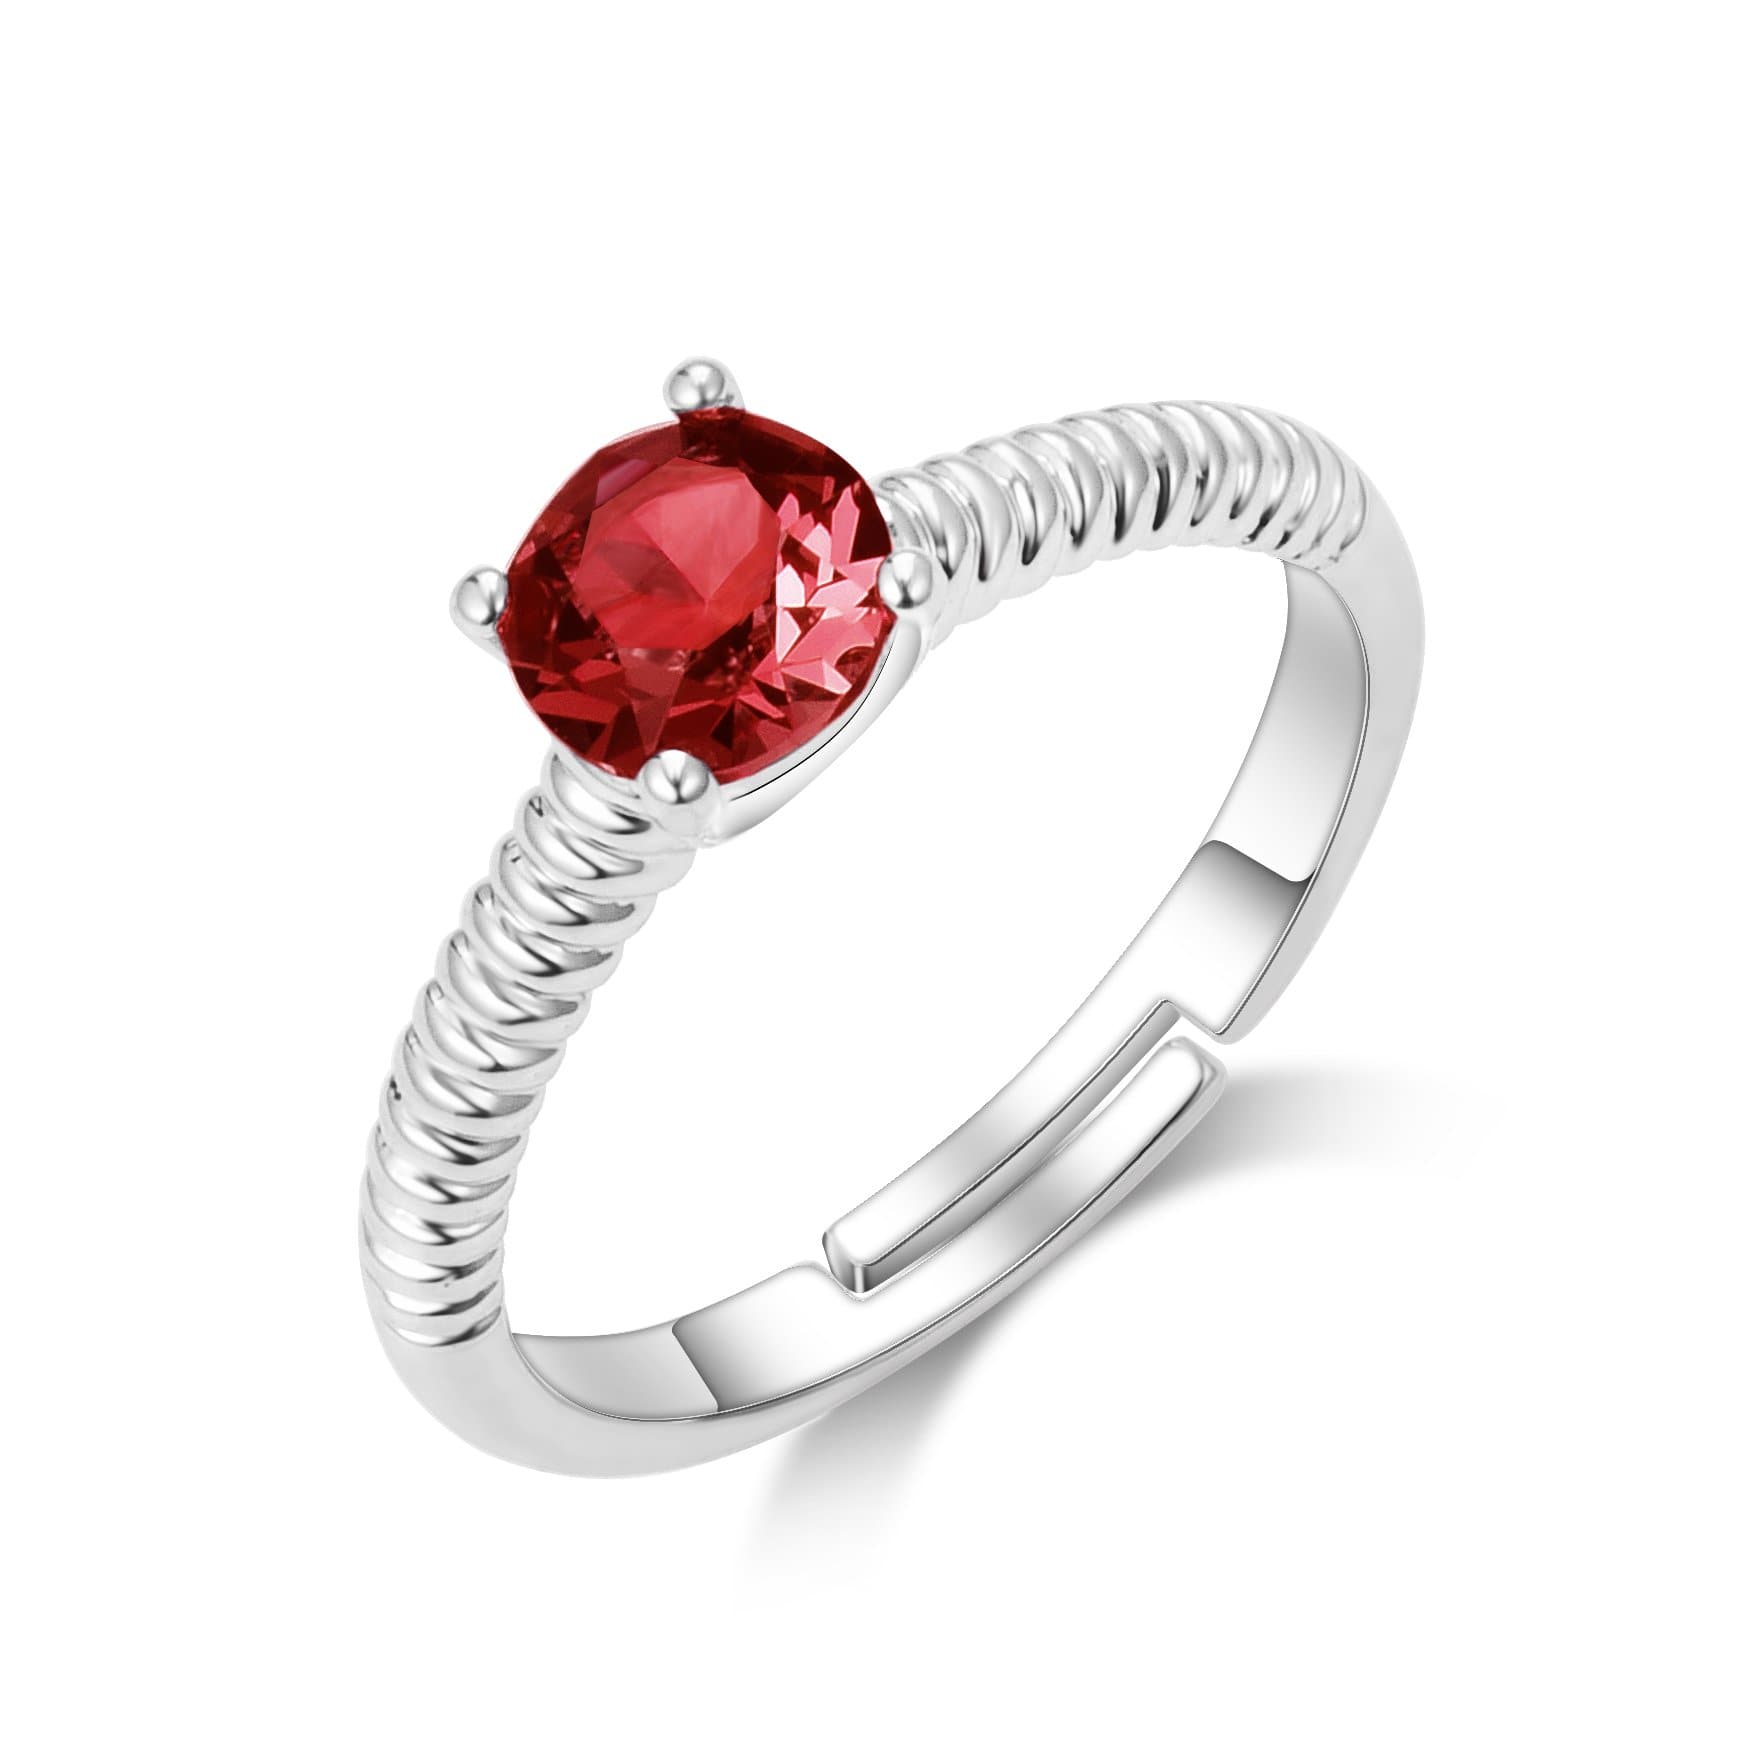 Red Adjustable Crystal Ring Created with Zircondia® Crystals by Philip Jones Jewellery